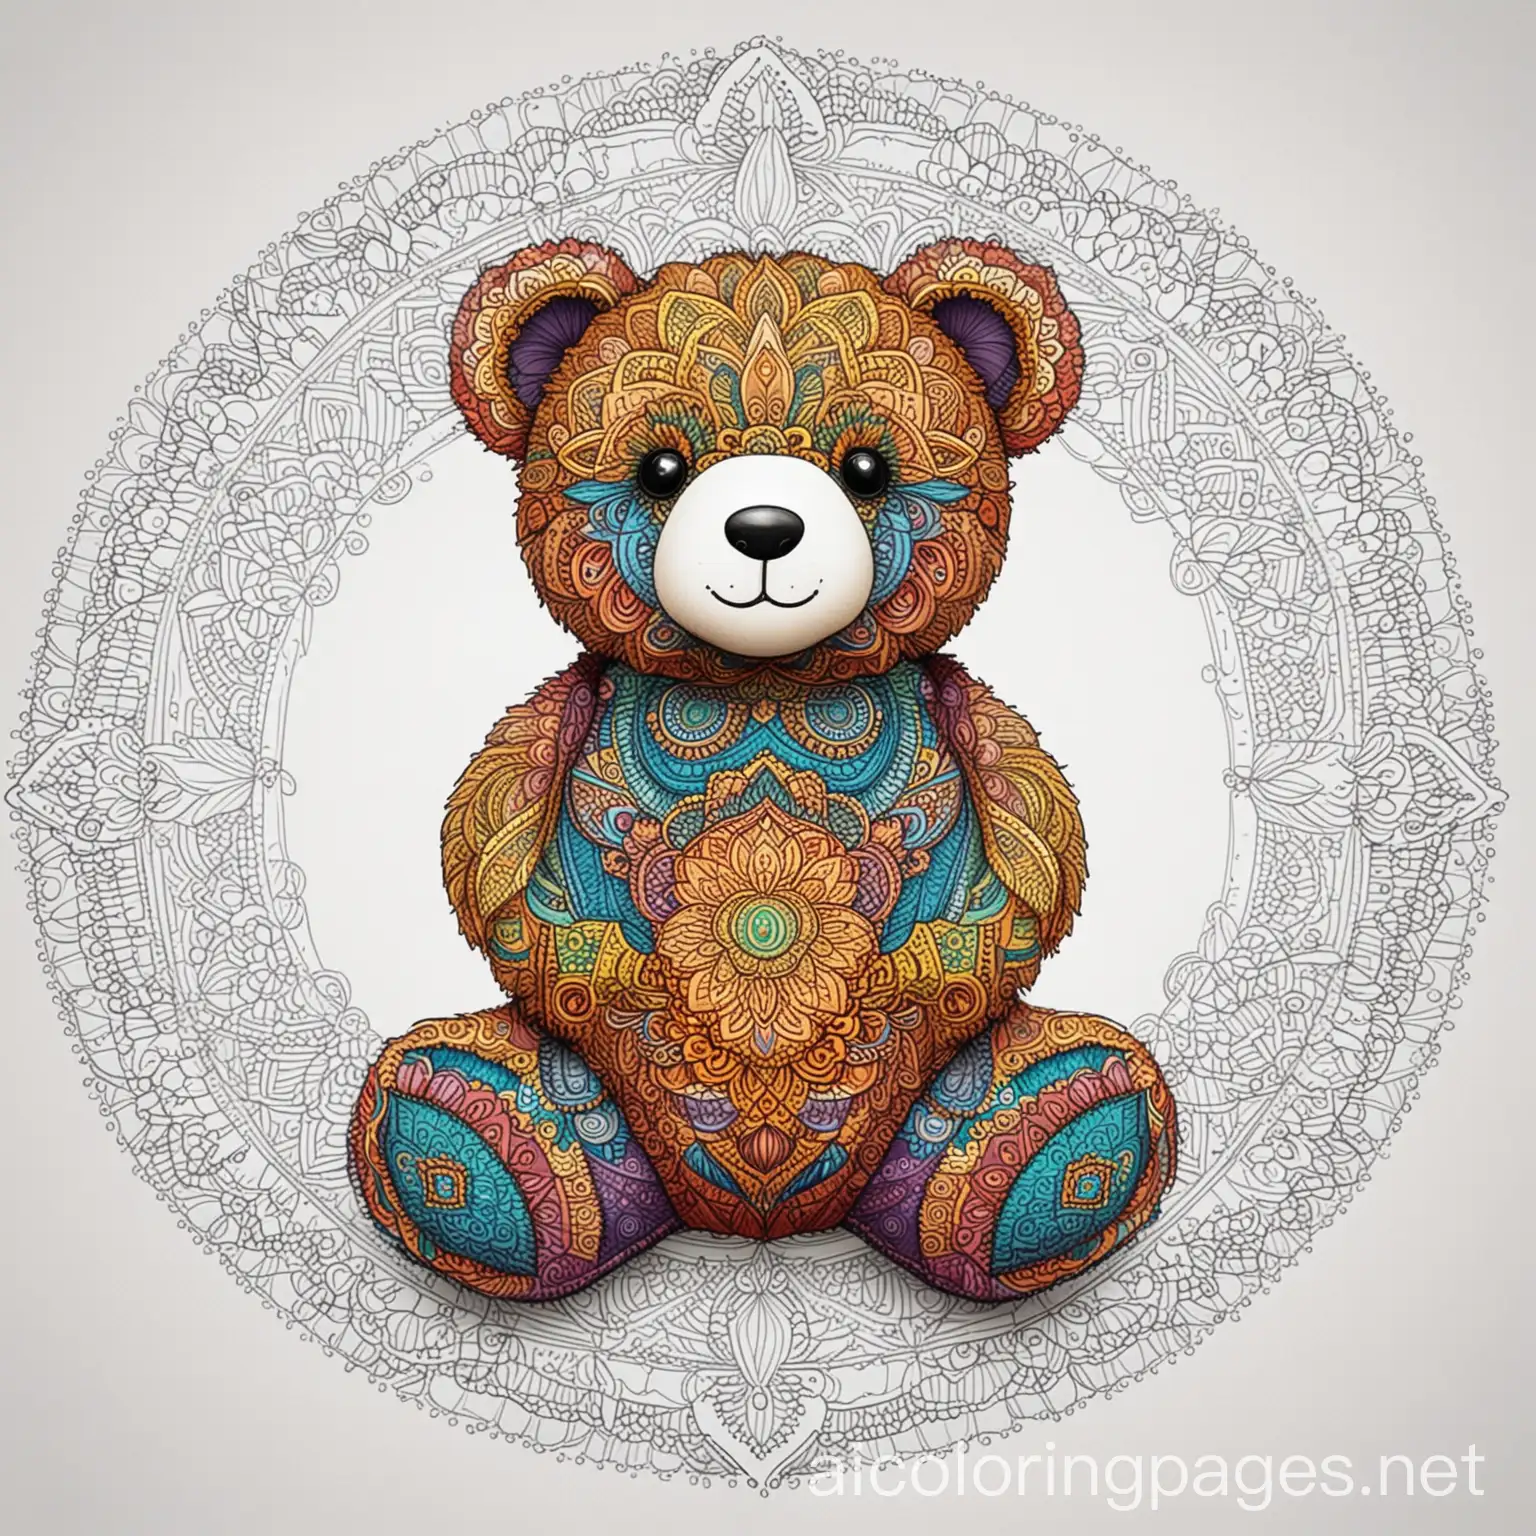 colored mandala teddy bear, Coloring Page, black and white, line art, white background, Simplicity, Ample White Space. The background of the coloring page is plain white to make it easy for young children to color within the lines. The outlines of all the subjects are easy to distinguish, making it simple for kids to color without too much difficulty